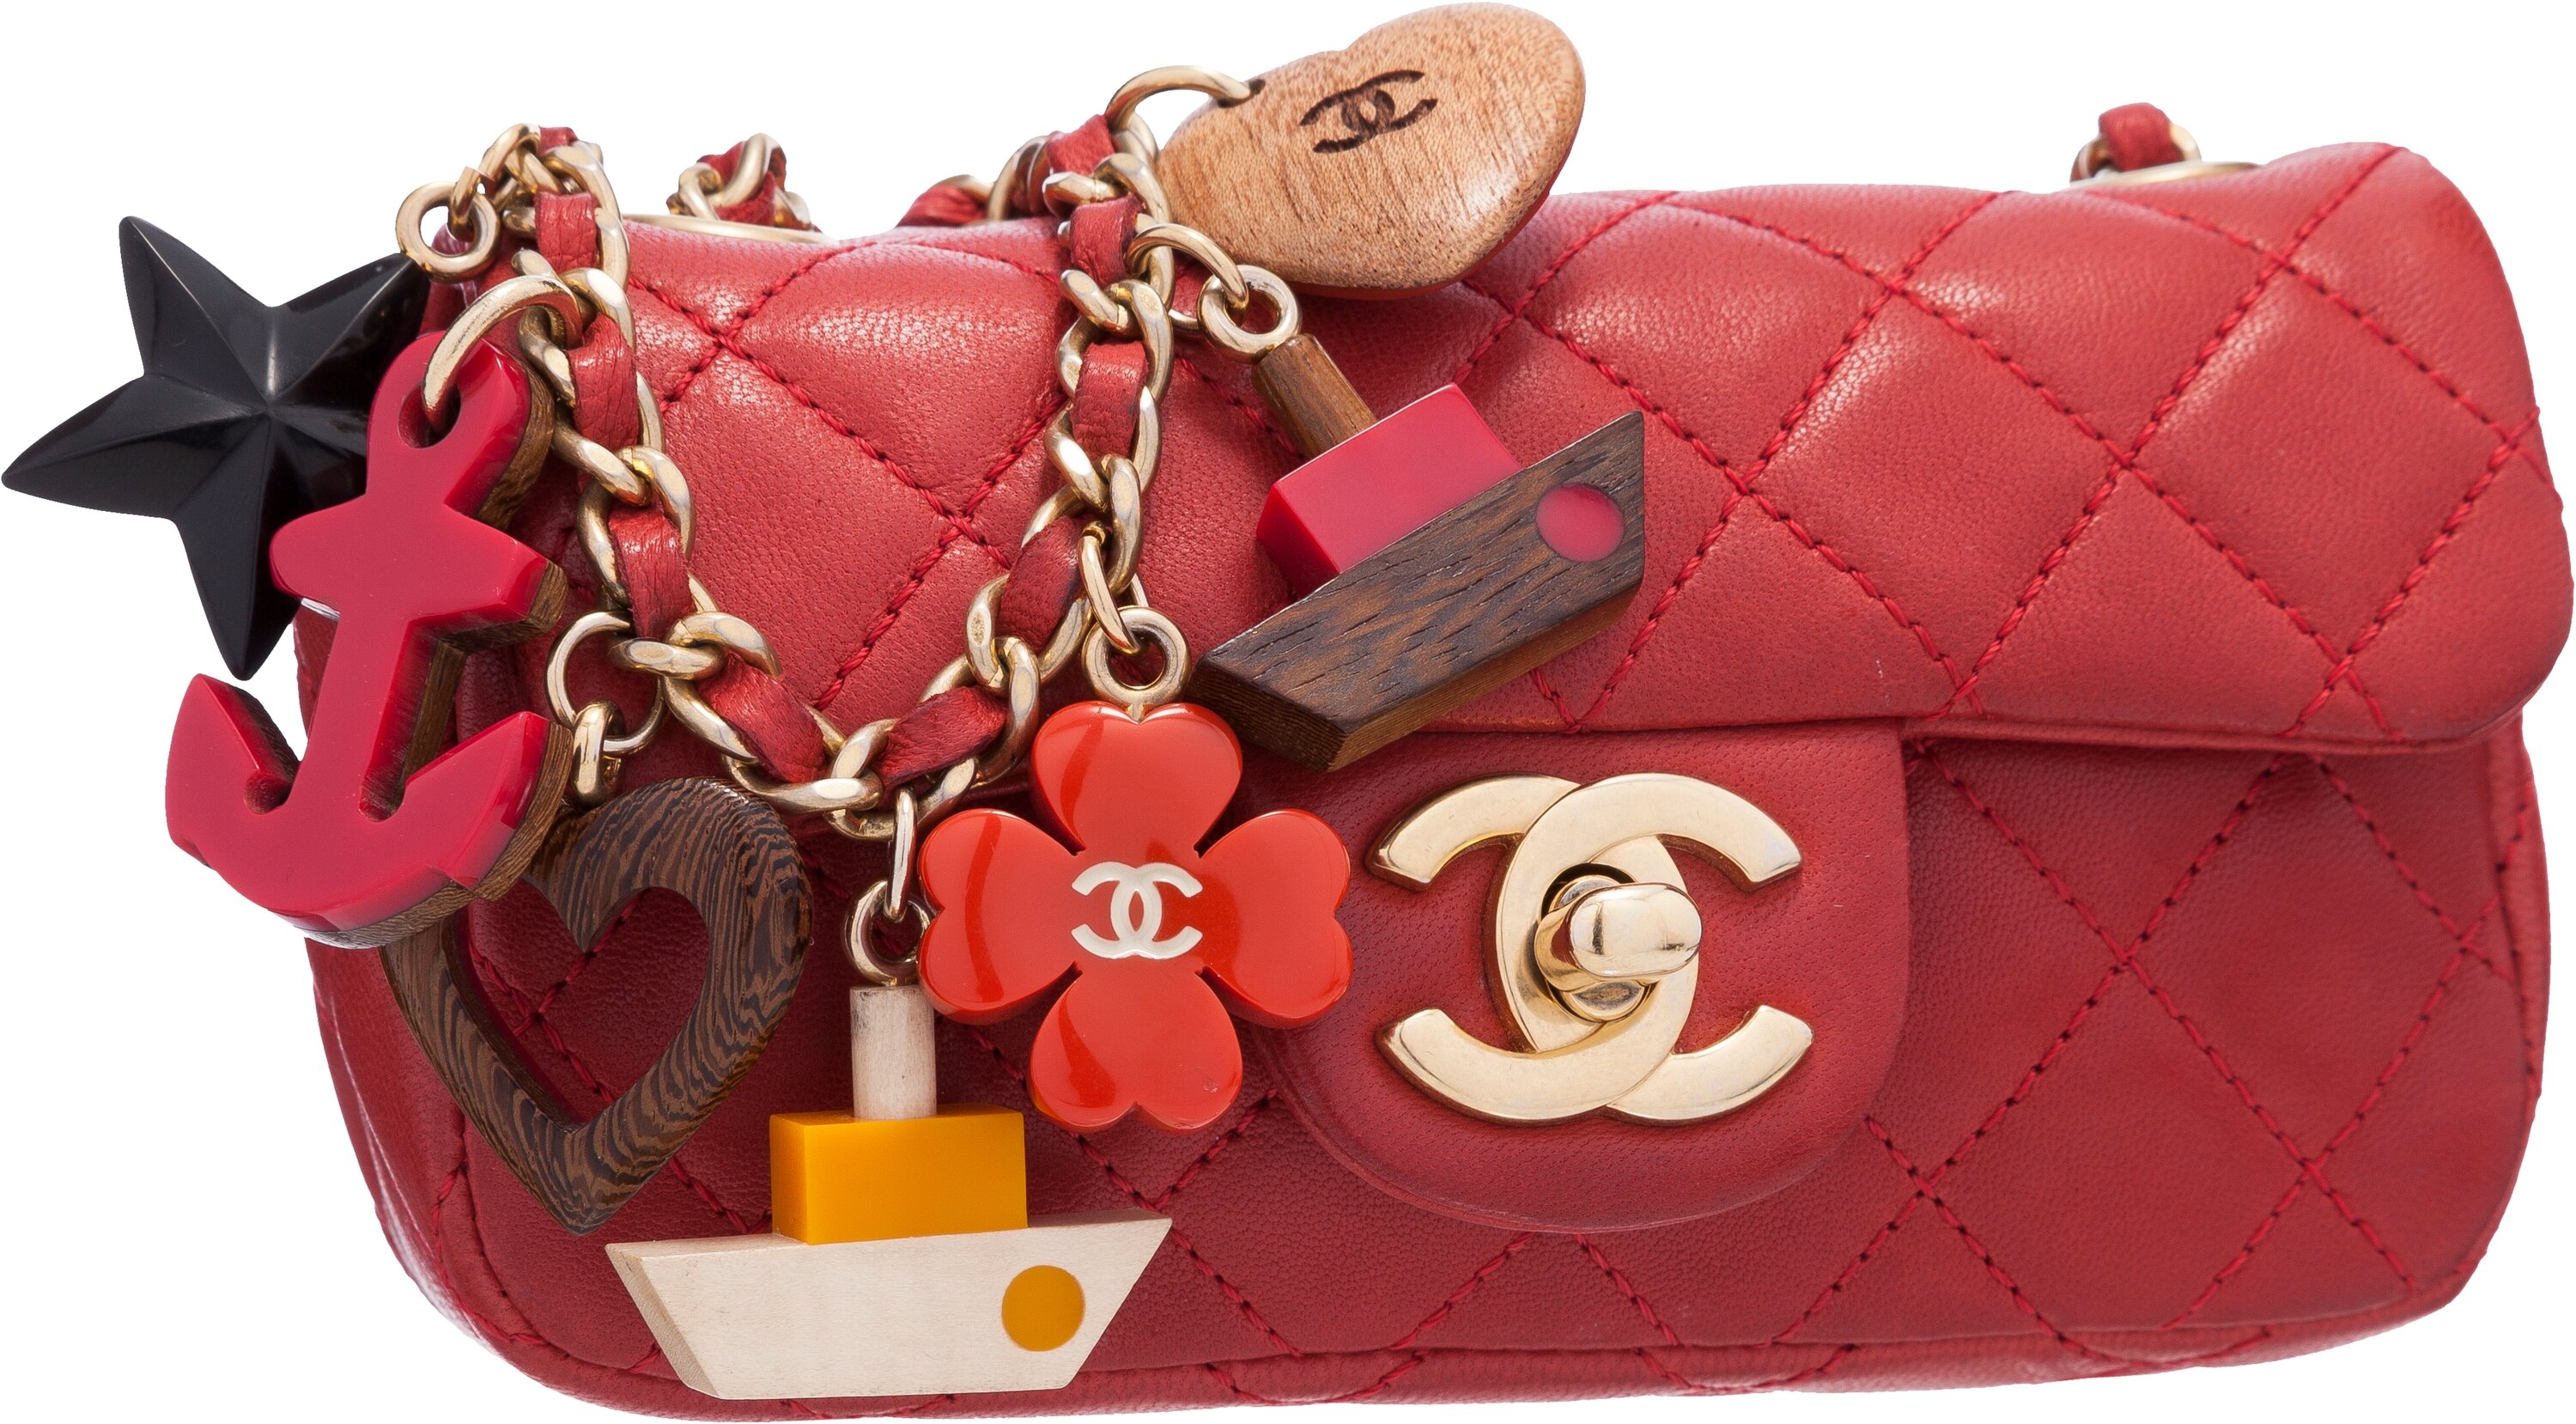 Chanel Limited Edition Red Quilted Lambskin Leather Mini Flap Bag